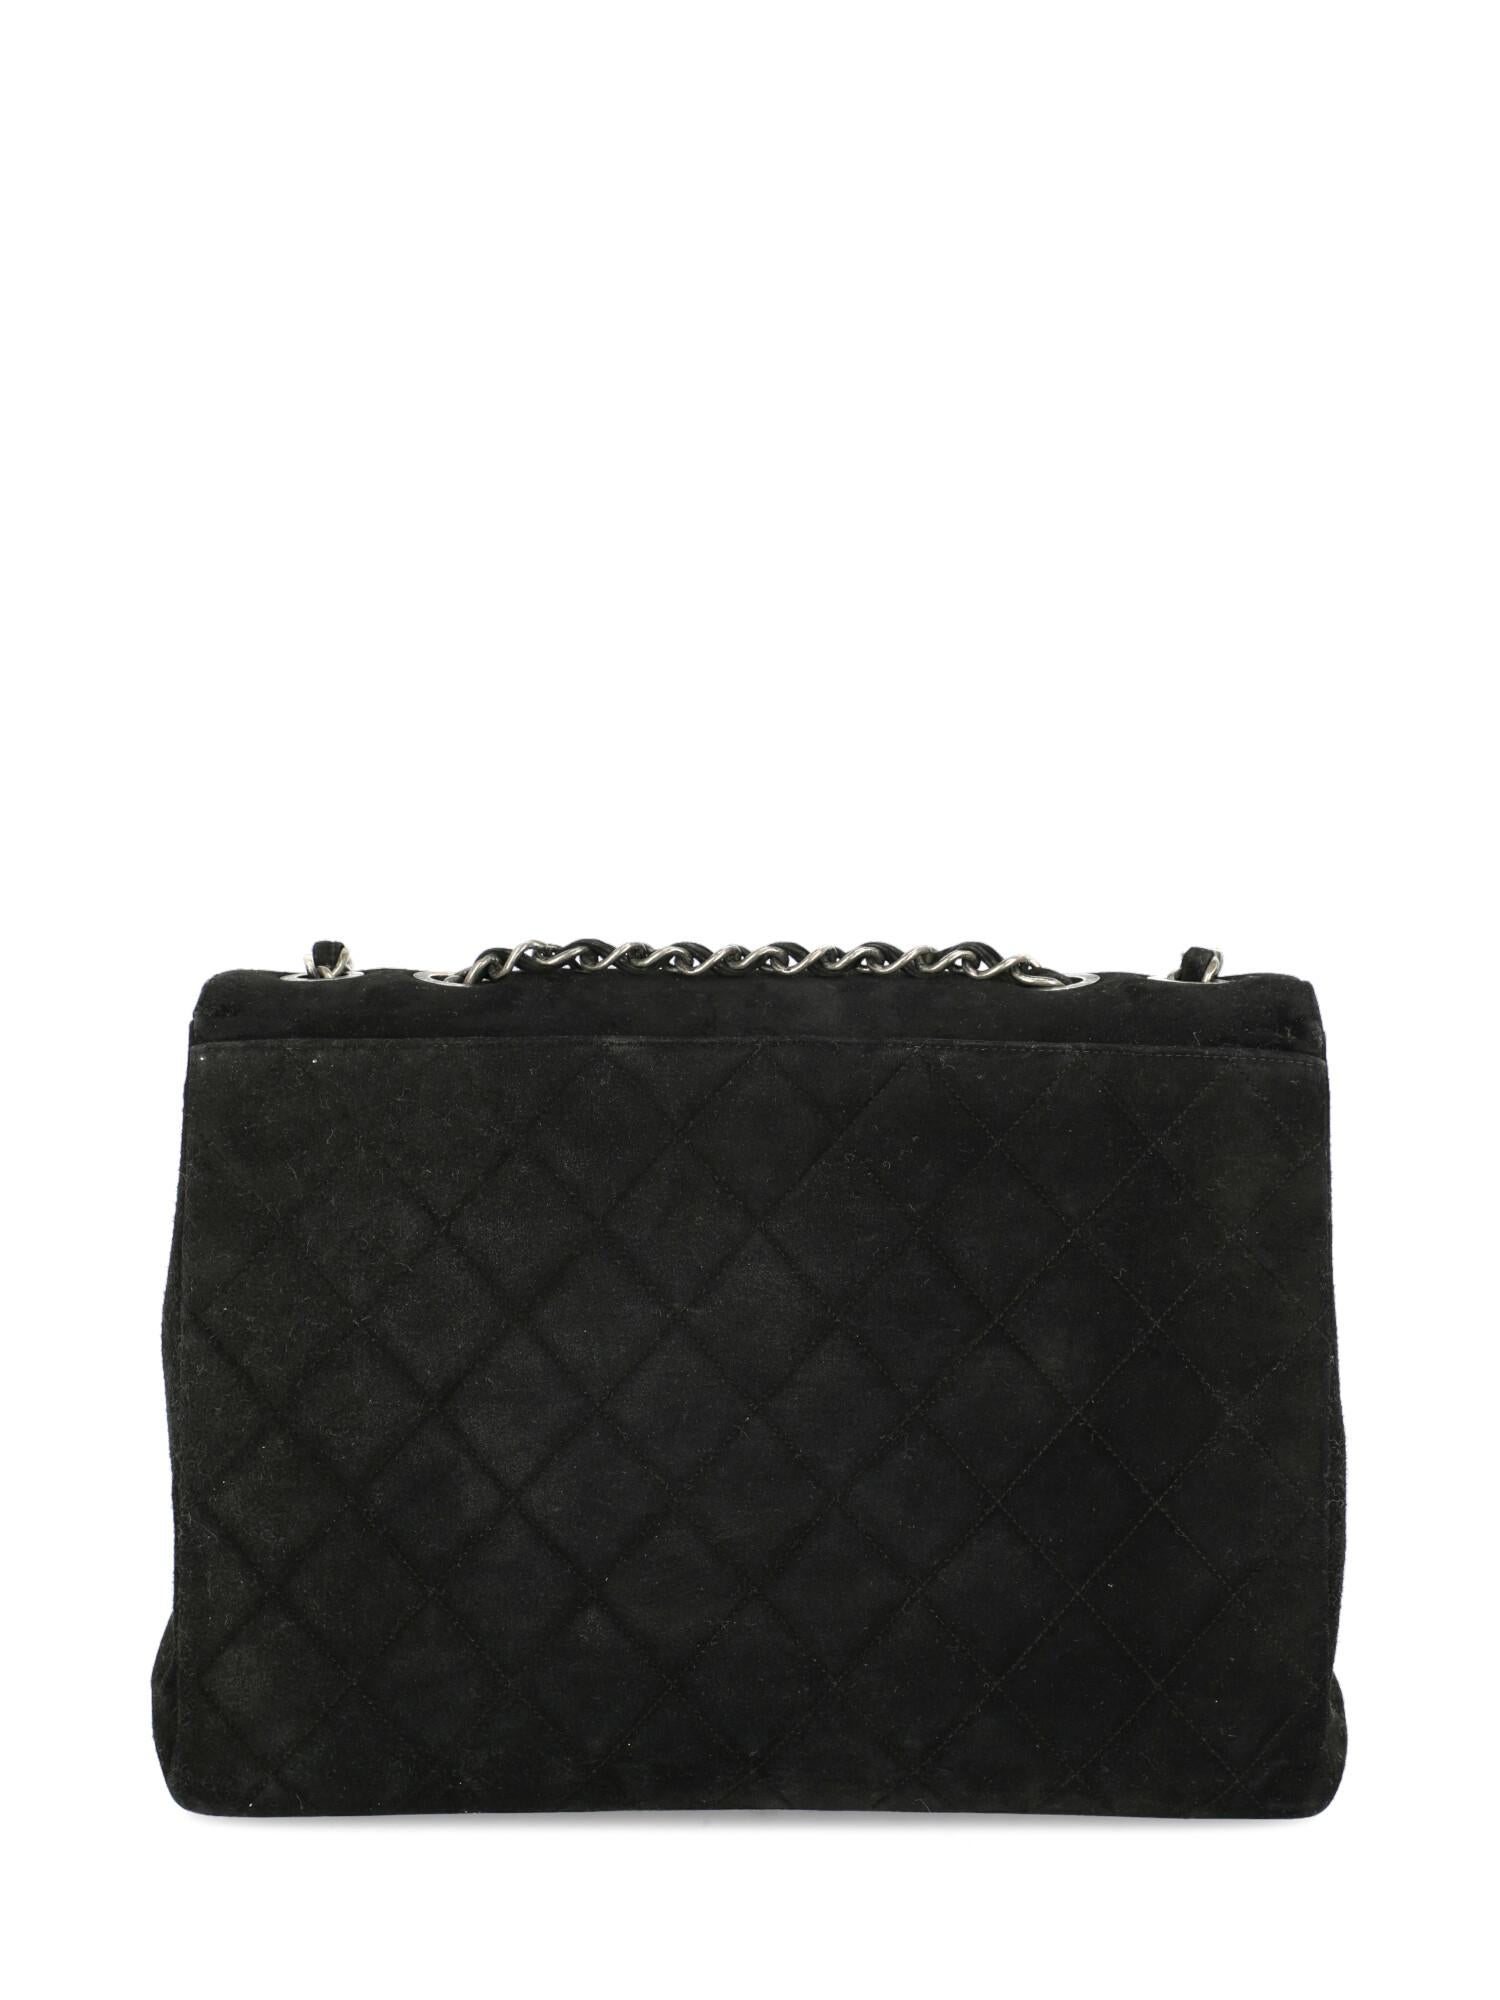 Chanel Women's Shoulder Bag Black Leather In Fair Condition For Sale In Milan, IT